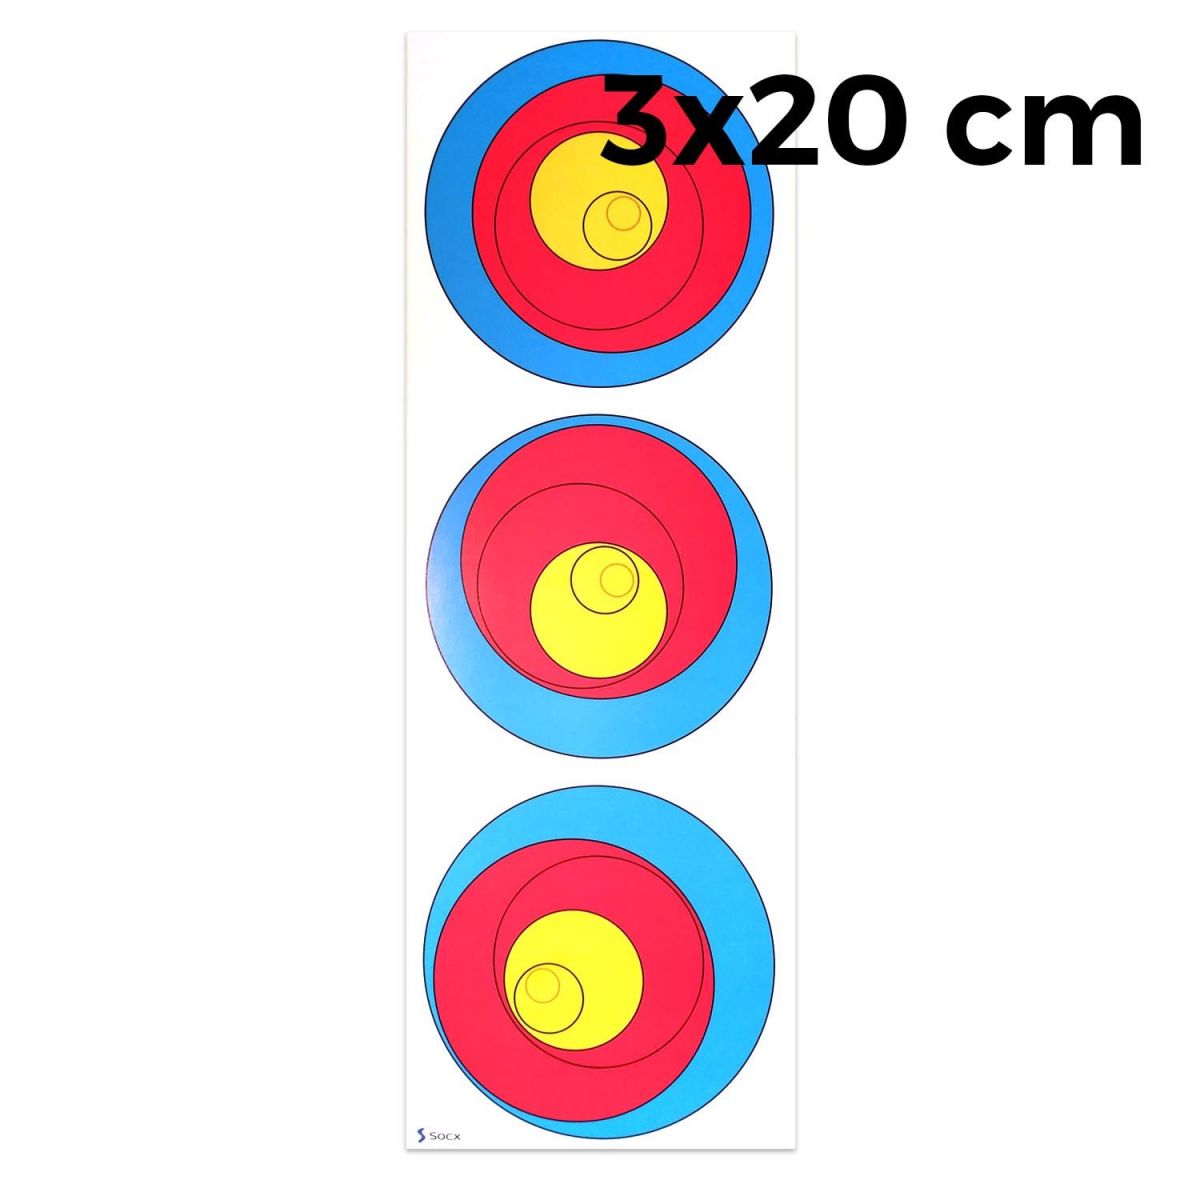 Socx Target Face 3x20 cm Differential Learning (50 Pcs.)